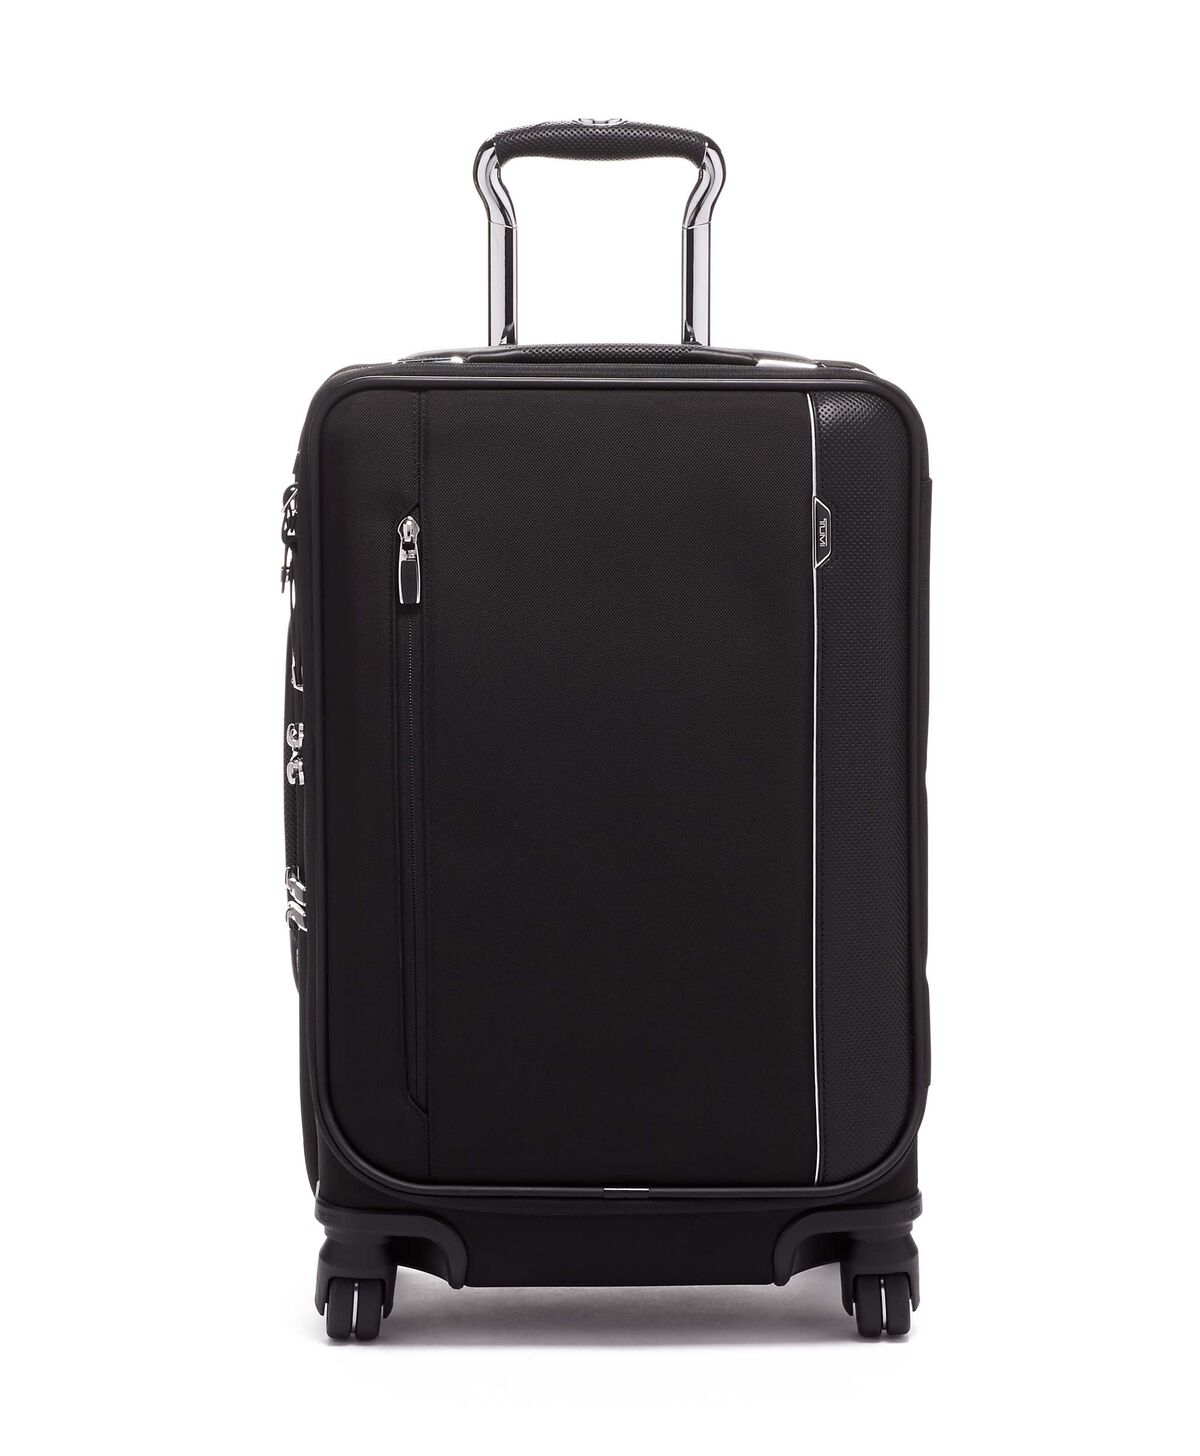 Minimalist Carry-On With Spinning Wheels For Travel